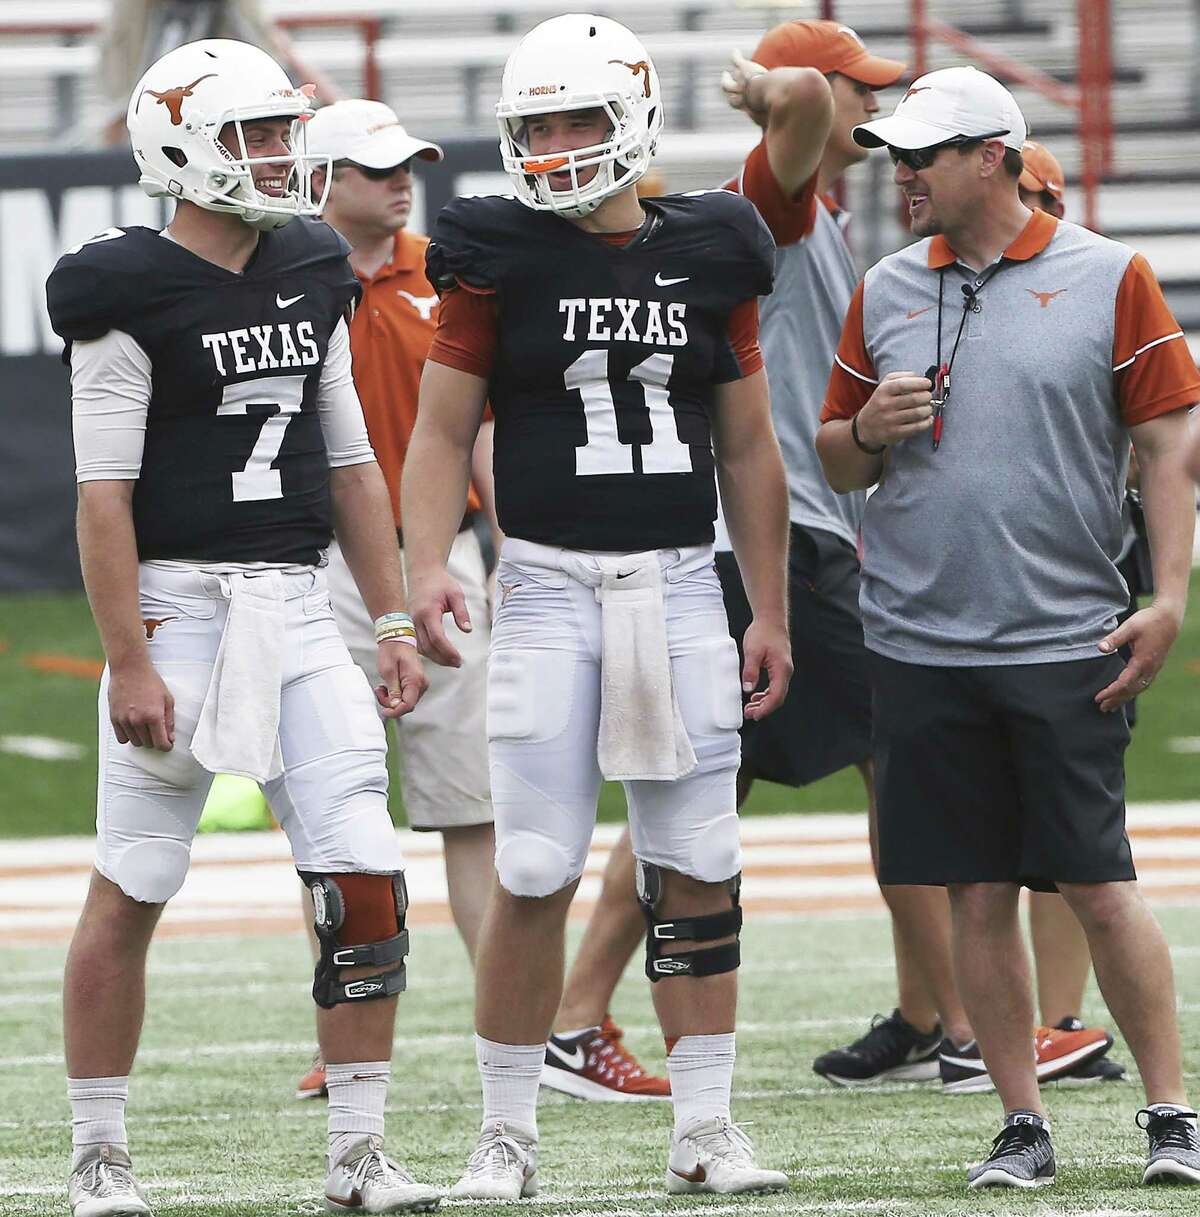 UT might need to rely on freshman QB in must-win game